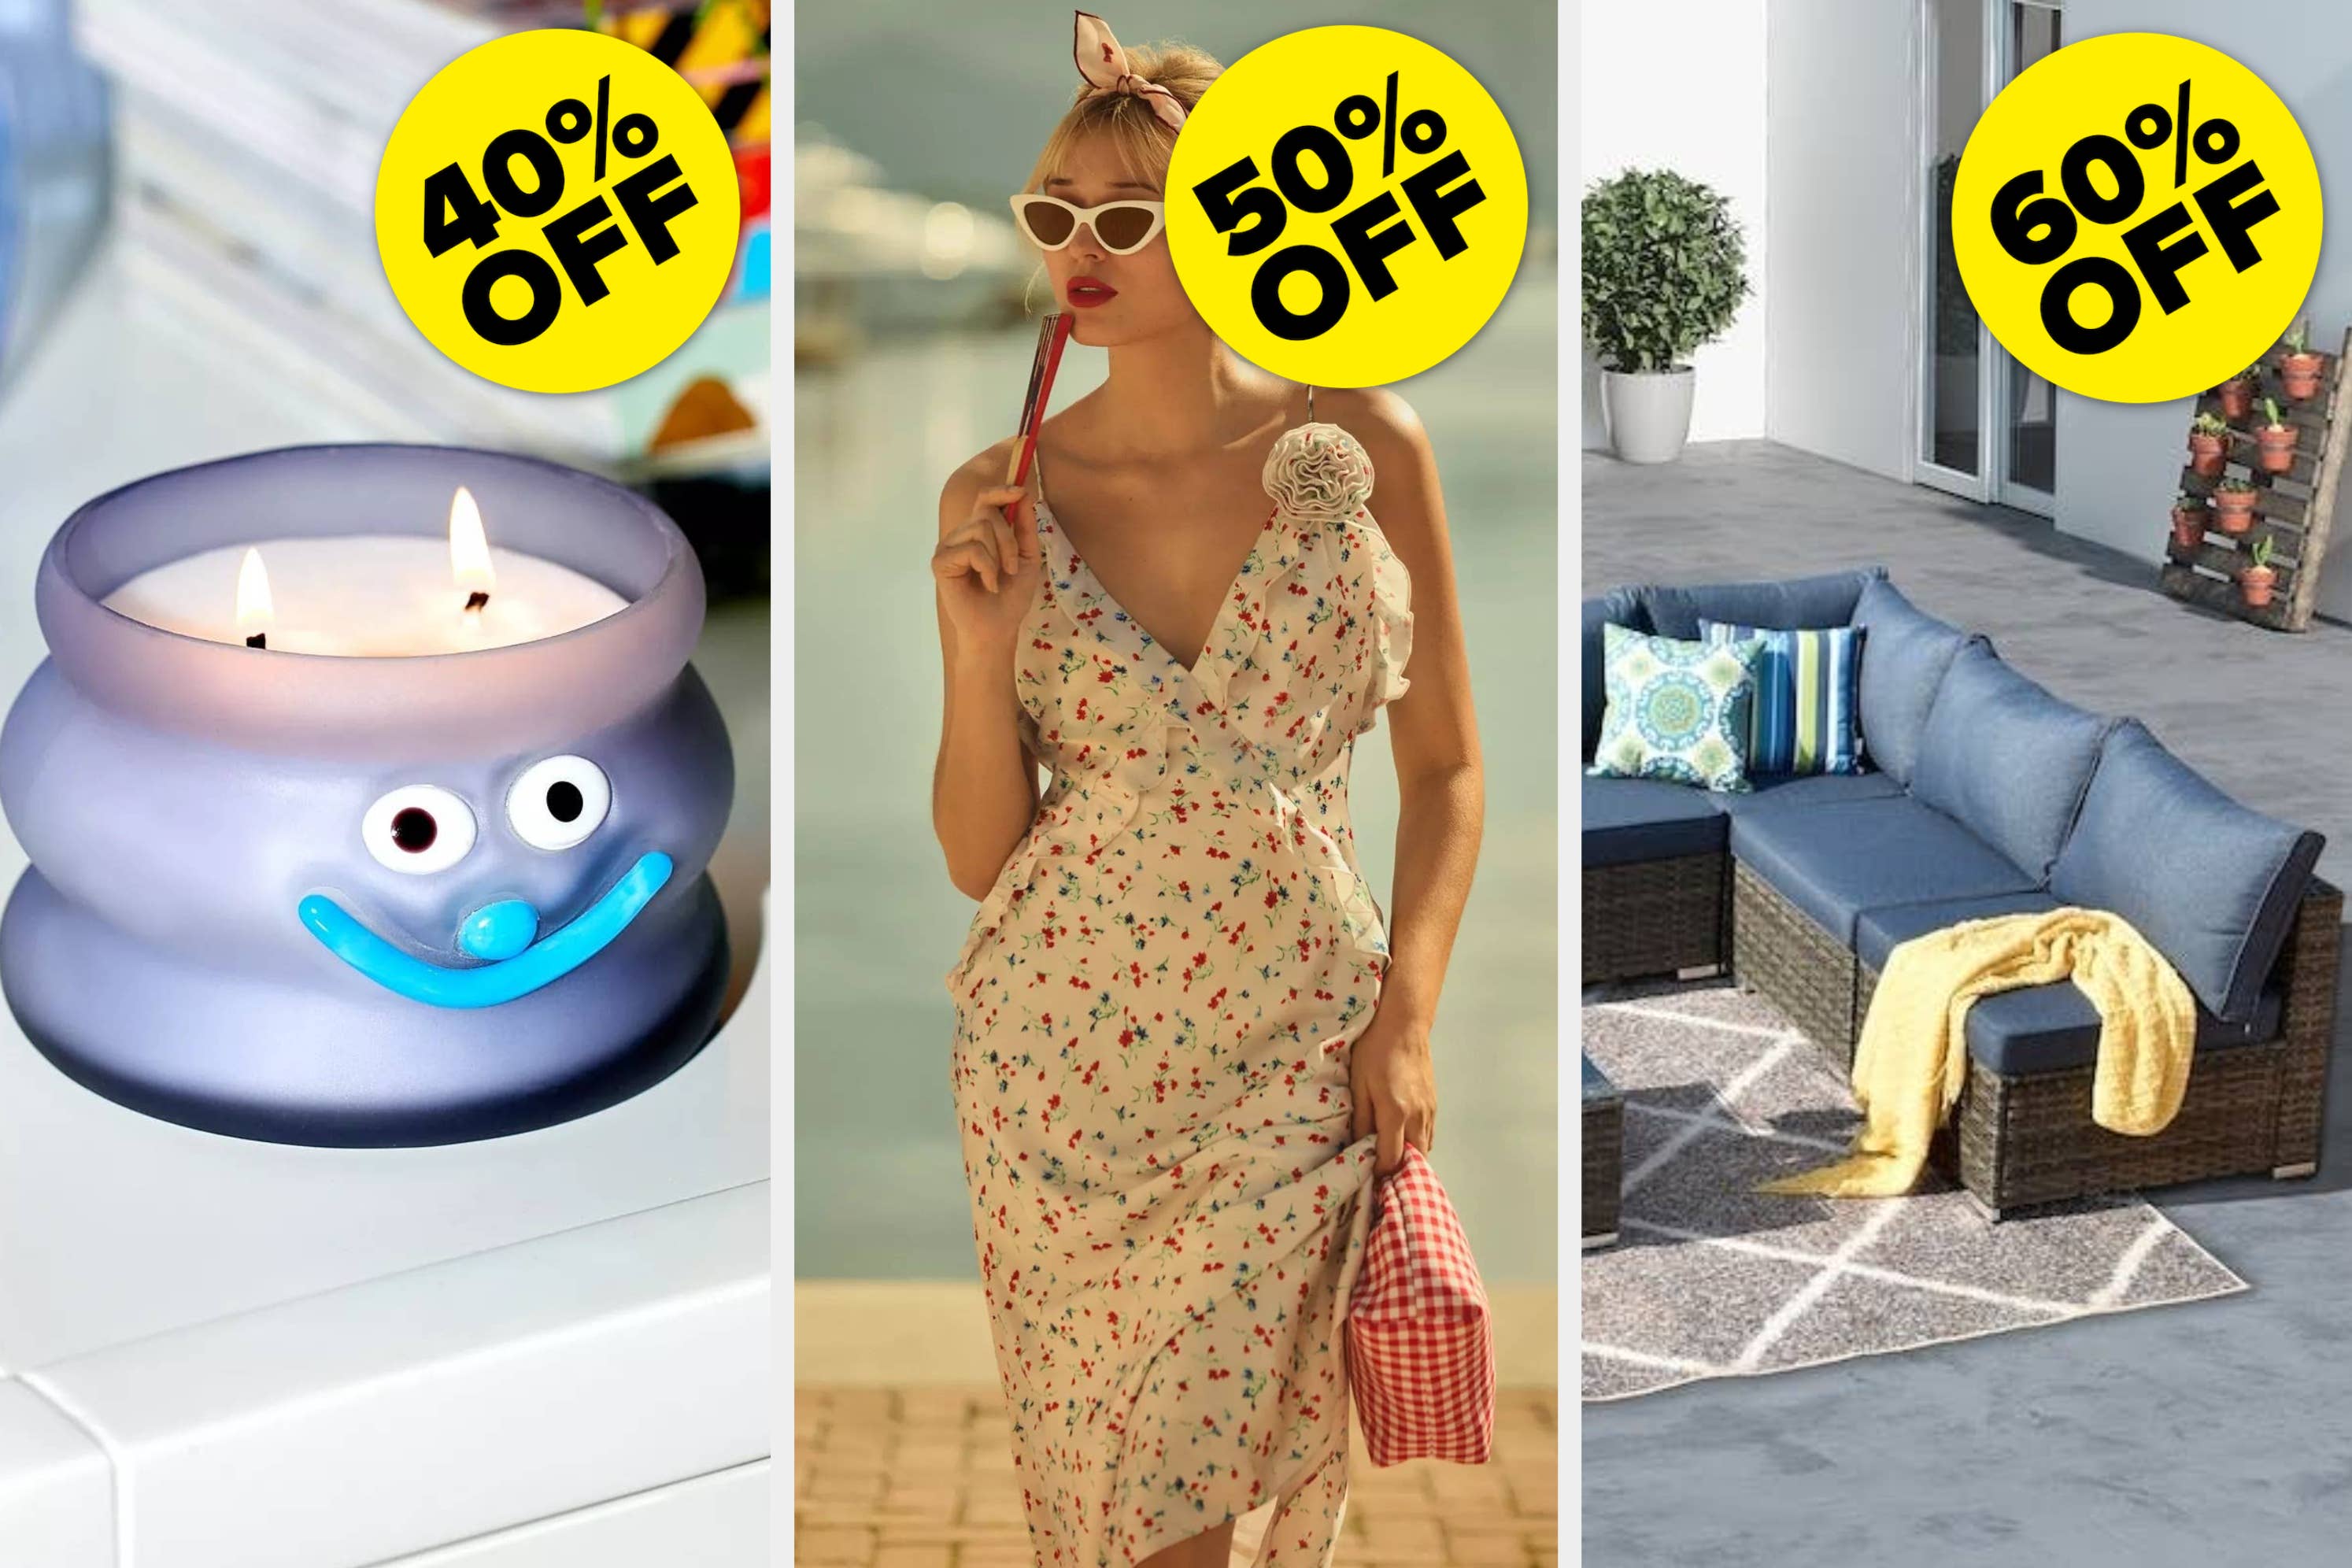 Three shopping deals: A candle with a smiley face at 40% off, a model in a floral dress at 50% off, and outdoor furniture set at 60% off